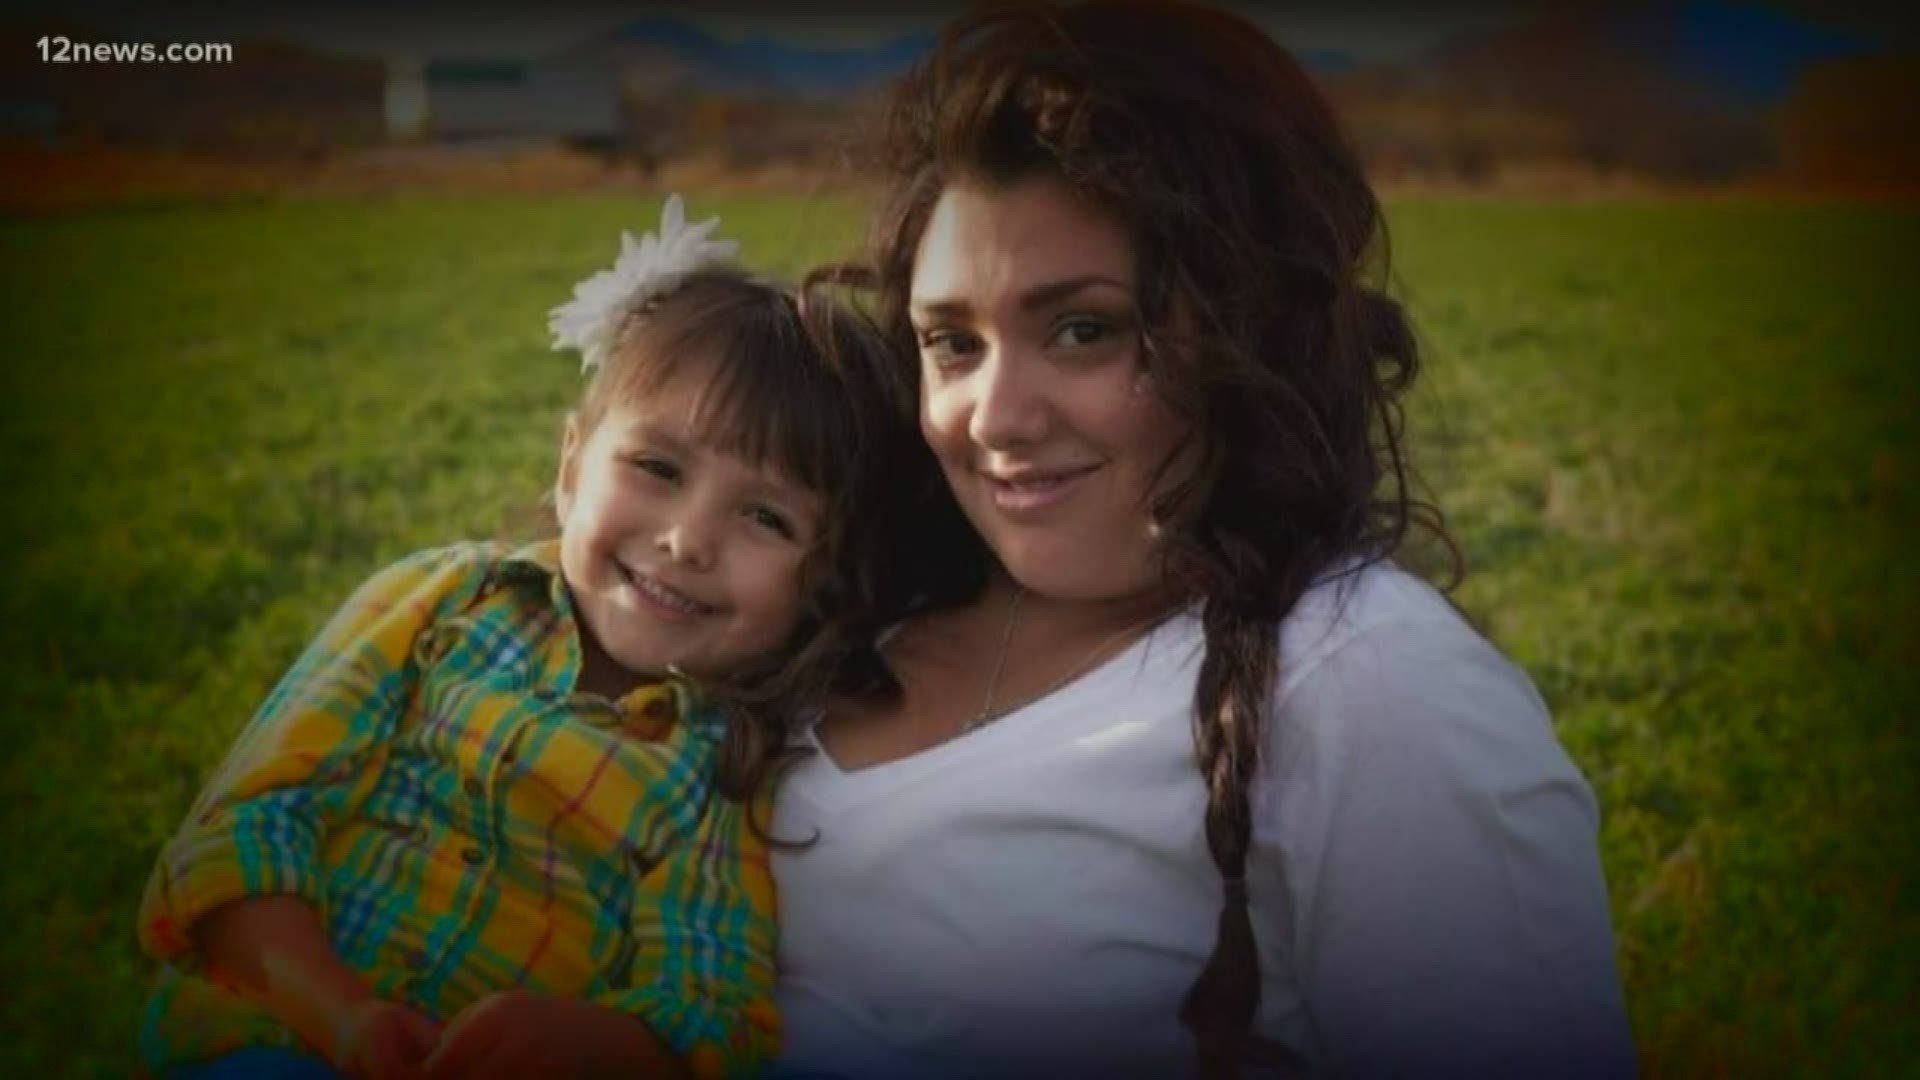 Deborah Sanchez says her daughter Jorden's death is part of a cover-up. The family is filing a notice of claim for $5 million.